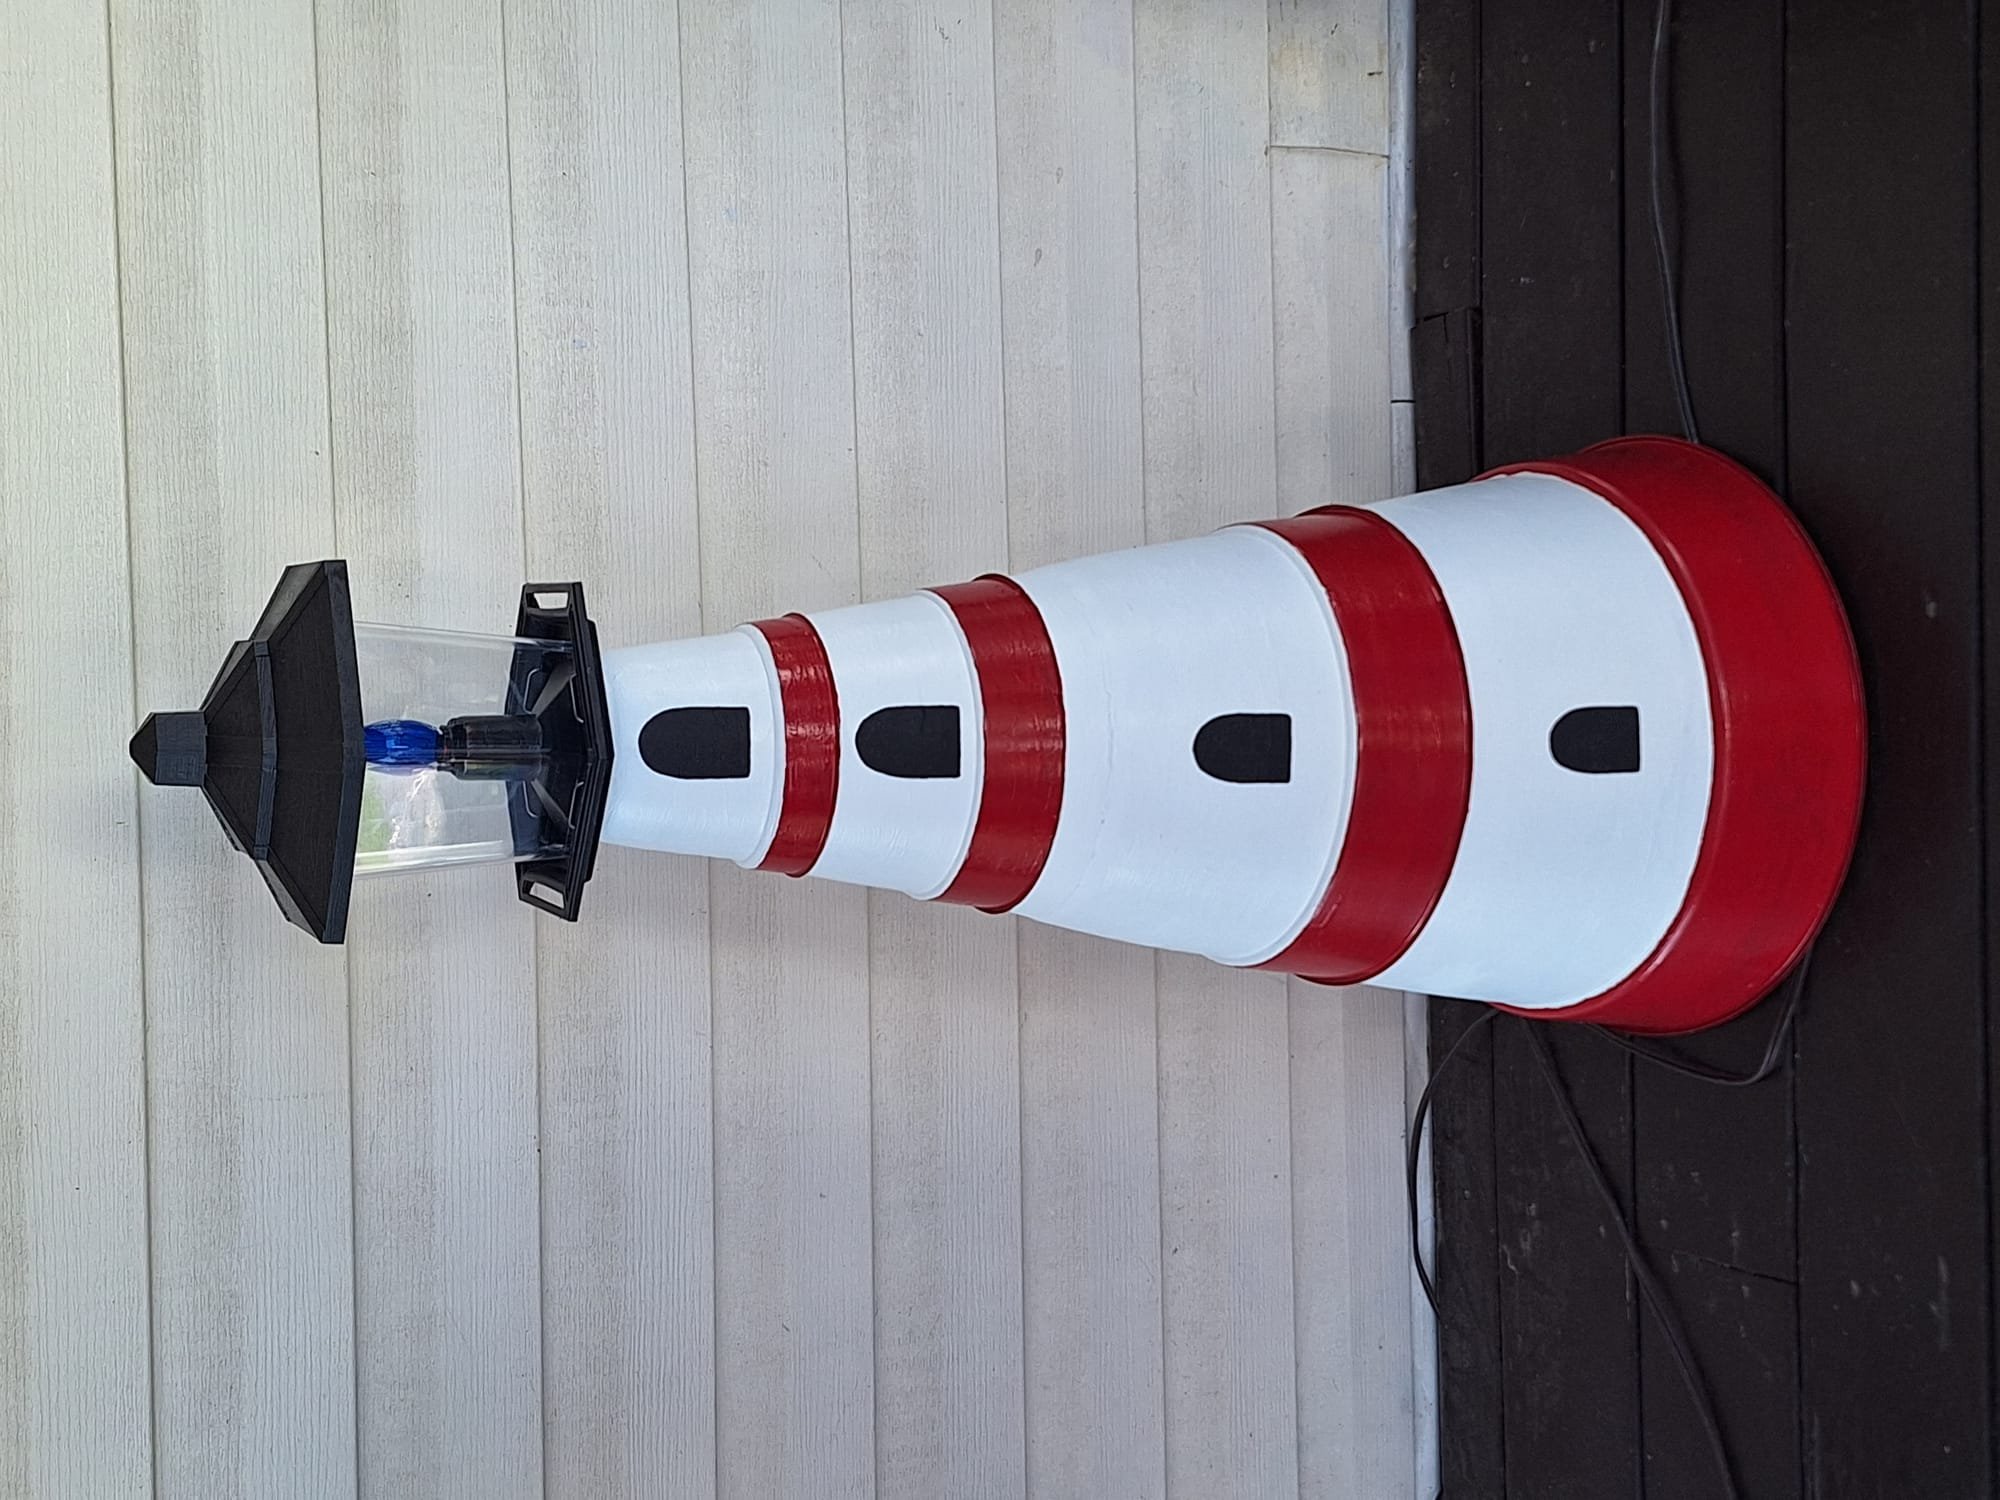 Electric lighthouse 37"